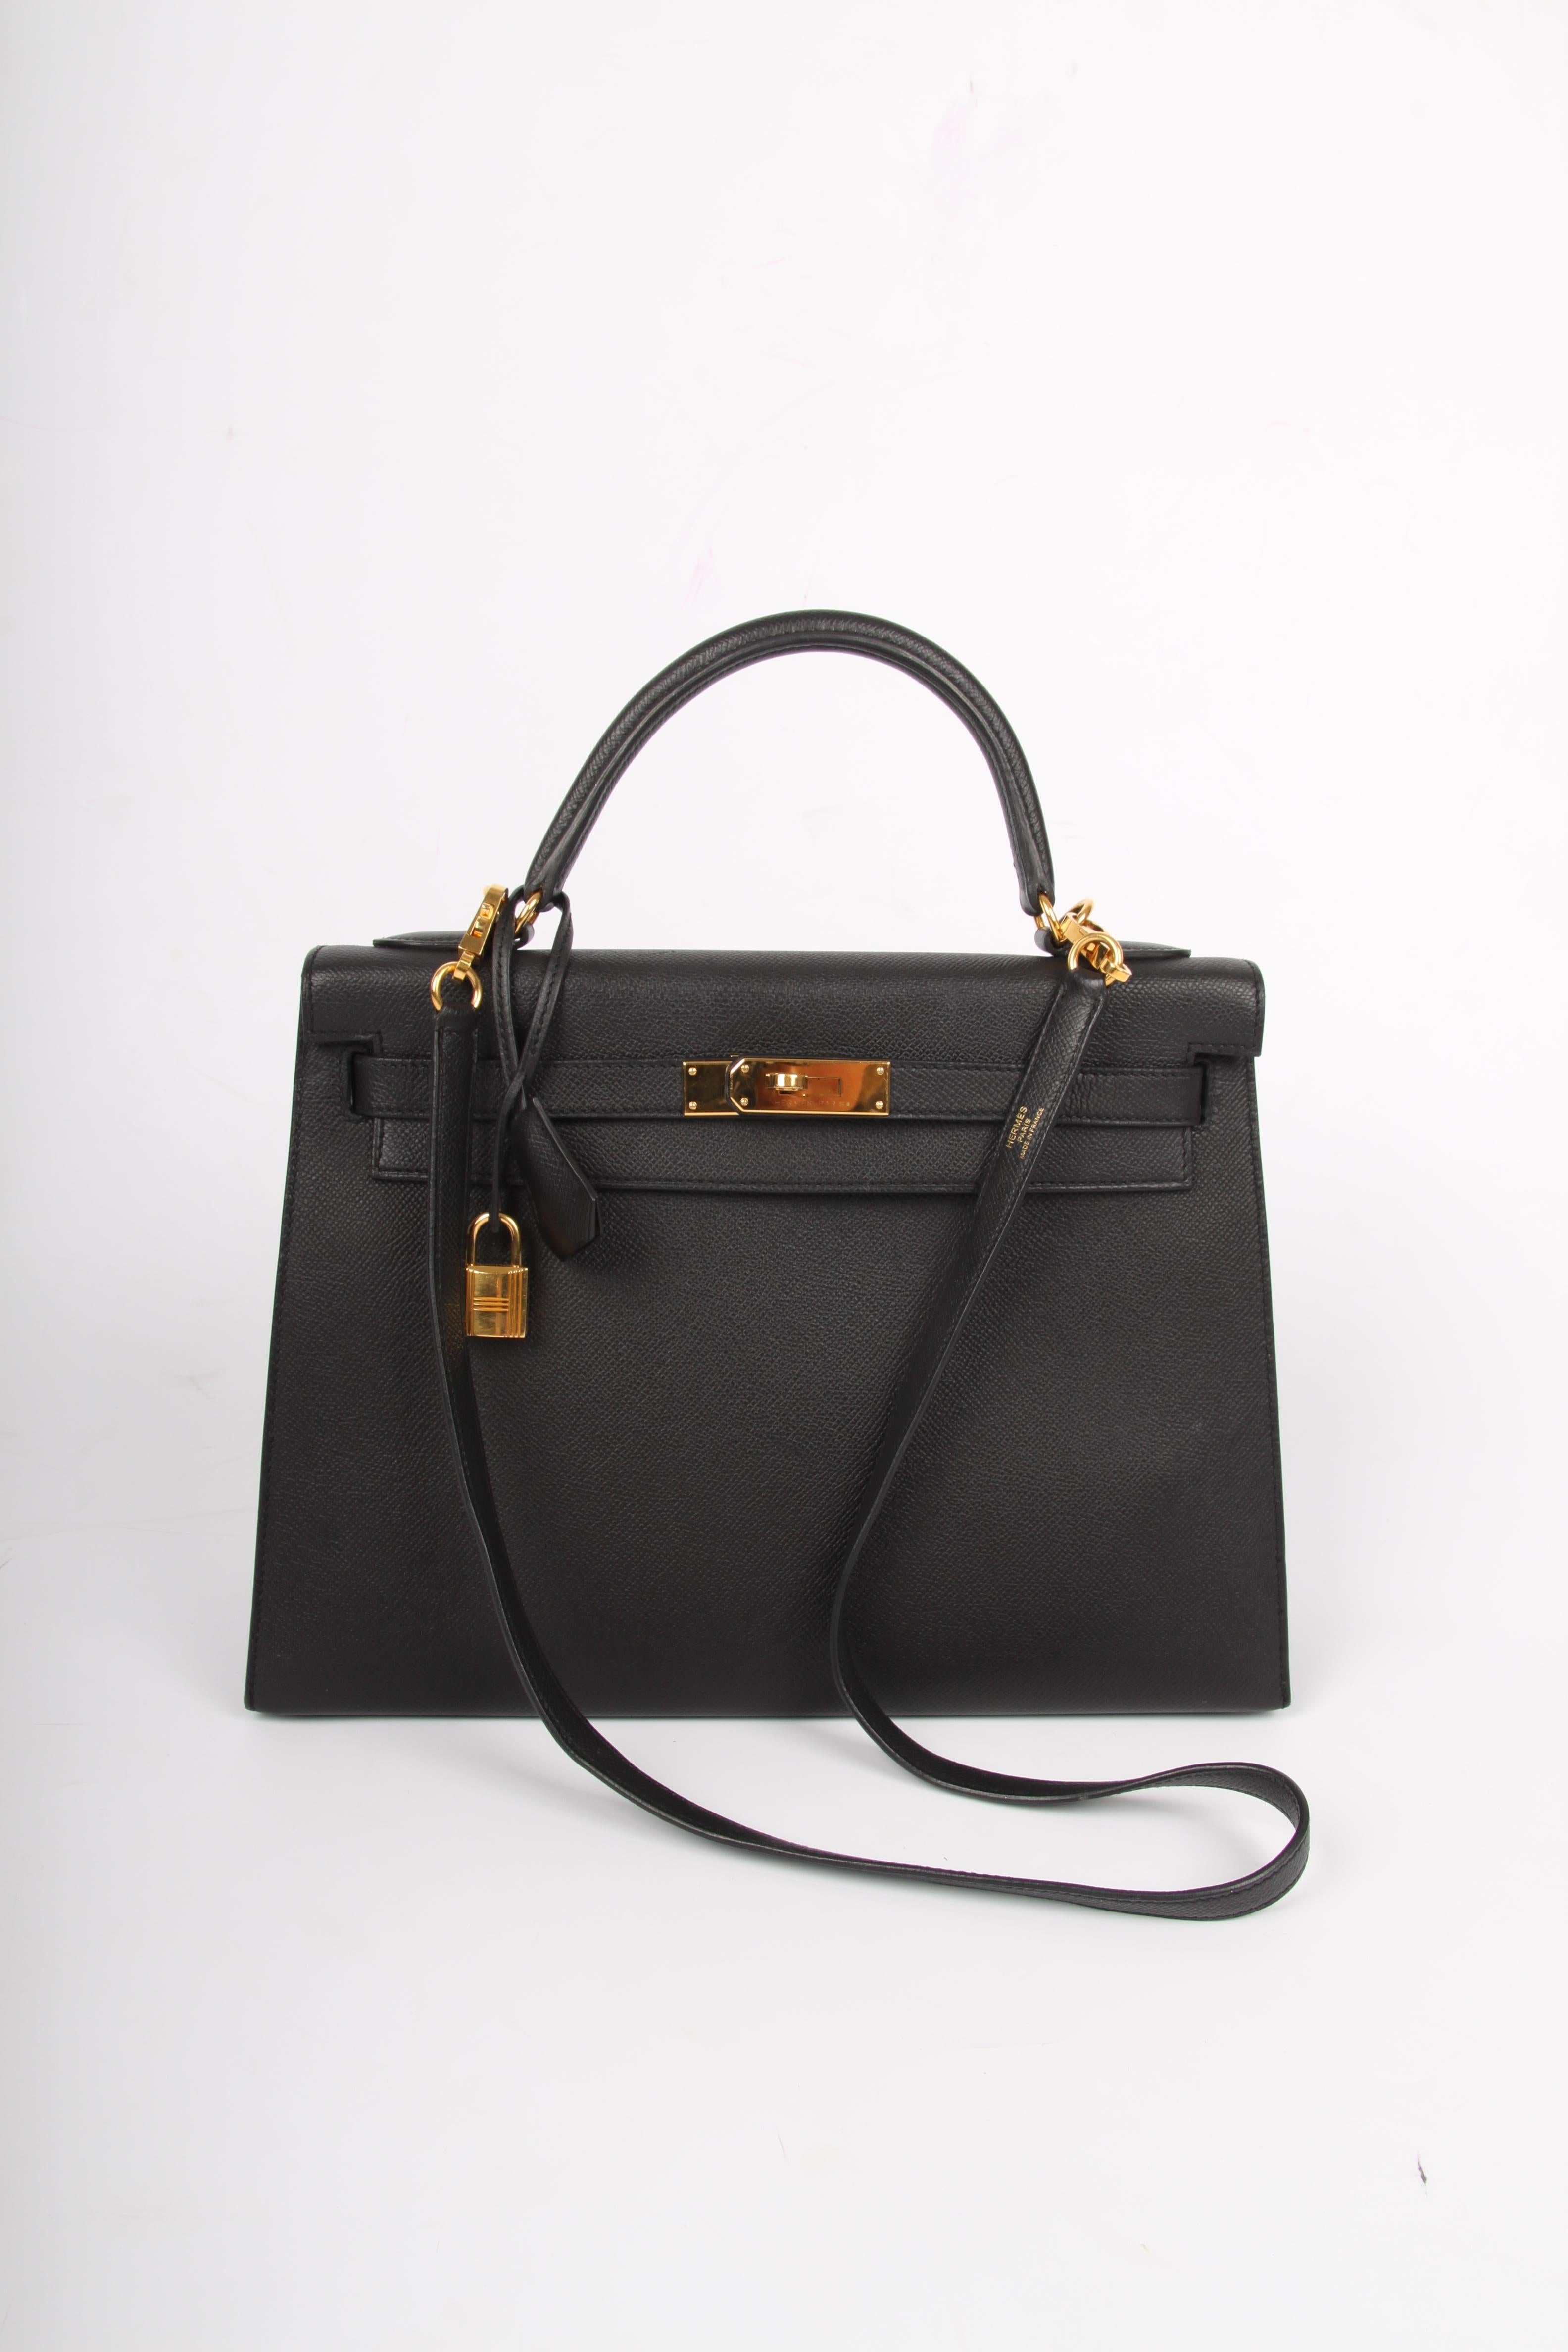 Yessss! Another beautiful Hermès bag in store! This is the Hermès Kelly Sellier Bag 32 crafted of Epsom leather.

On the inside there are three flat pockets, one of them has a Hermès zipper with a leather tab. The tab has to be in a straight line